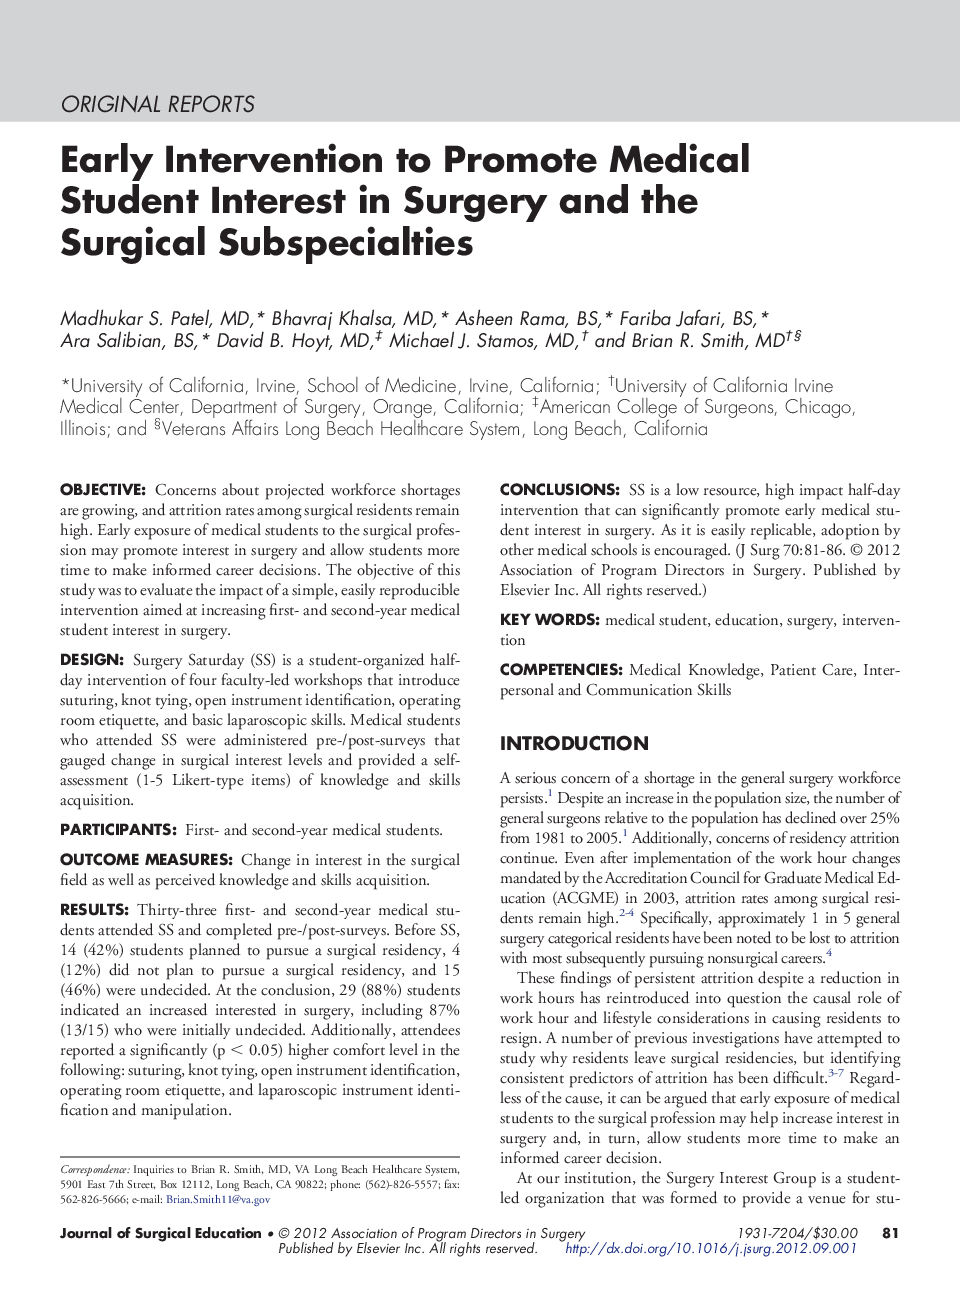 Early Intervention to Promote Medical Student Interest in Surgery and the Surgical Subspecialties